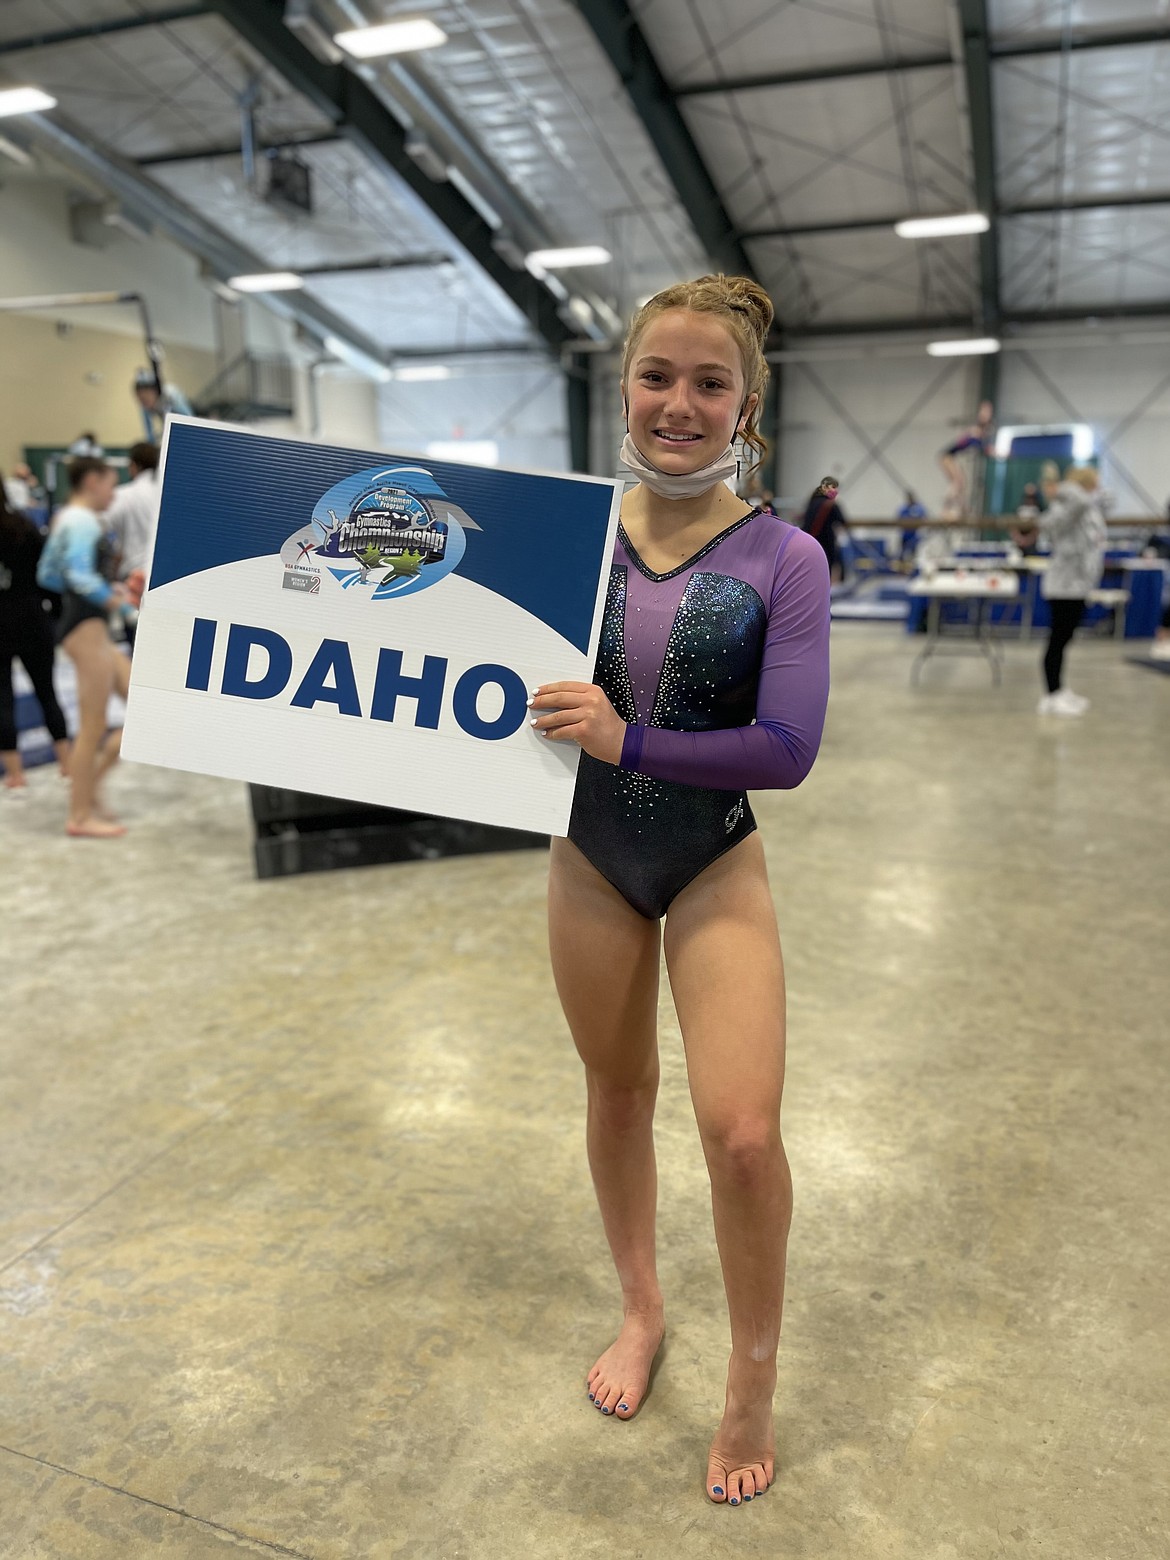 Courtesy photo
Avant Coeur Gymnastics Level 9 Lily Call at the Region 2 championships in Helena, Mont. Lily took 6th in her age group, qualifying her on to compete at Western Nationals in Iowa in May.